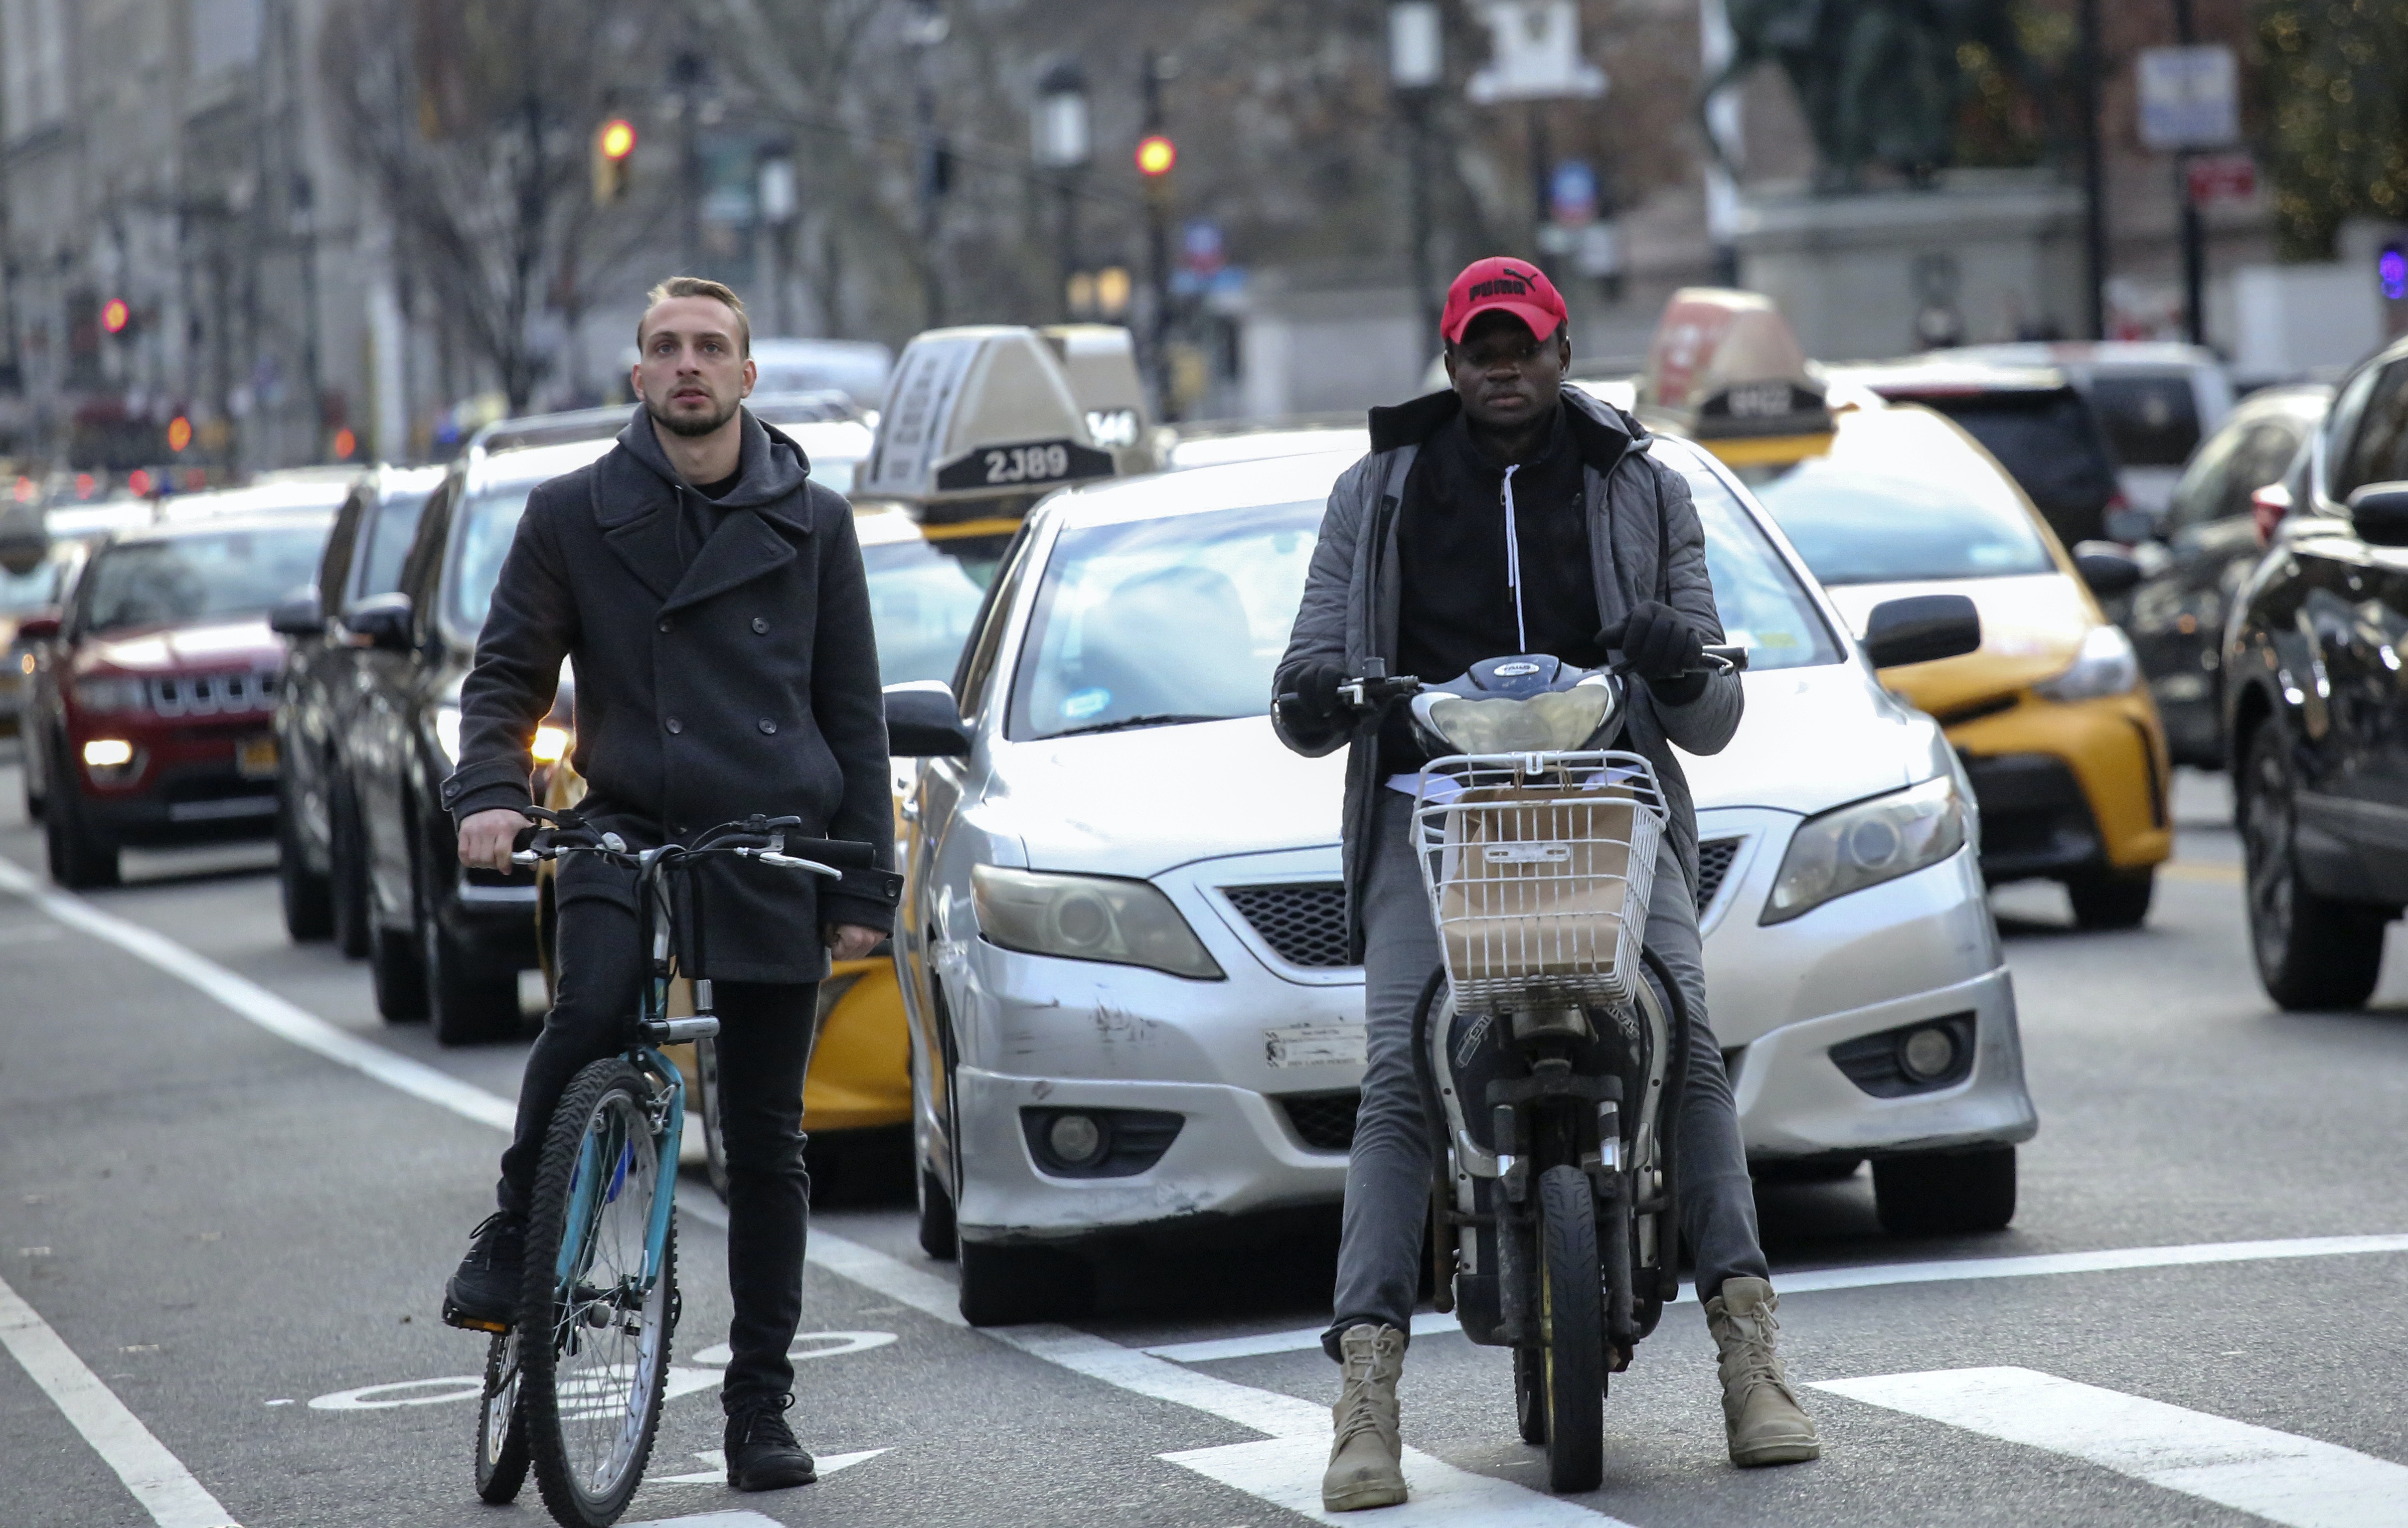 Two men on bicycles wait with taxis at a city stoplight.